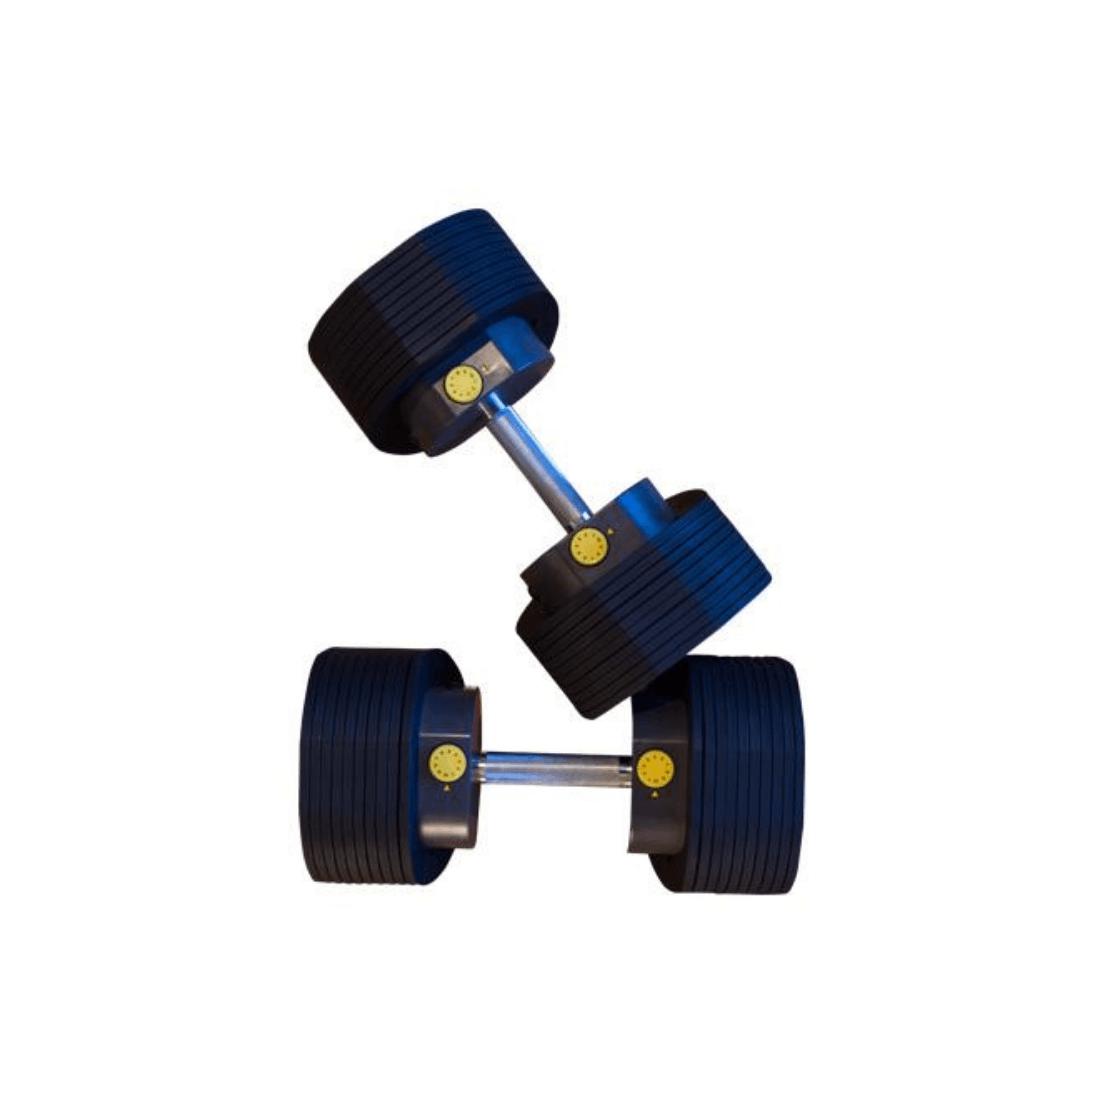 MX Select Adjustable Dumbbells MX55 with Stand for each arm